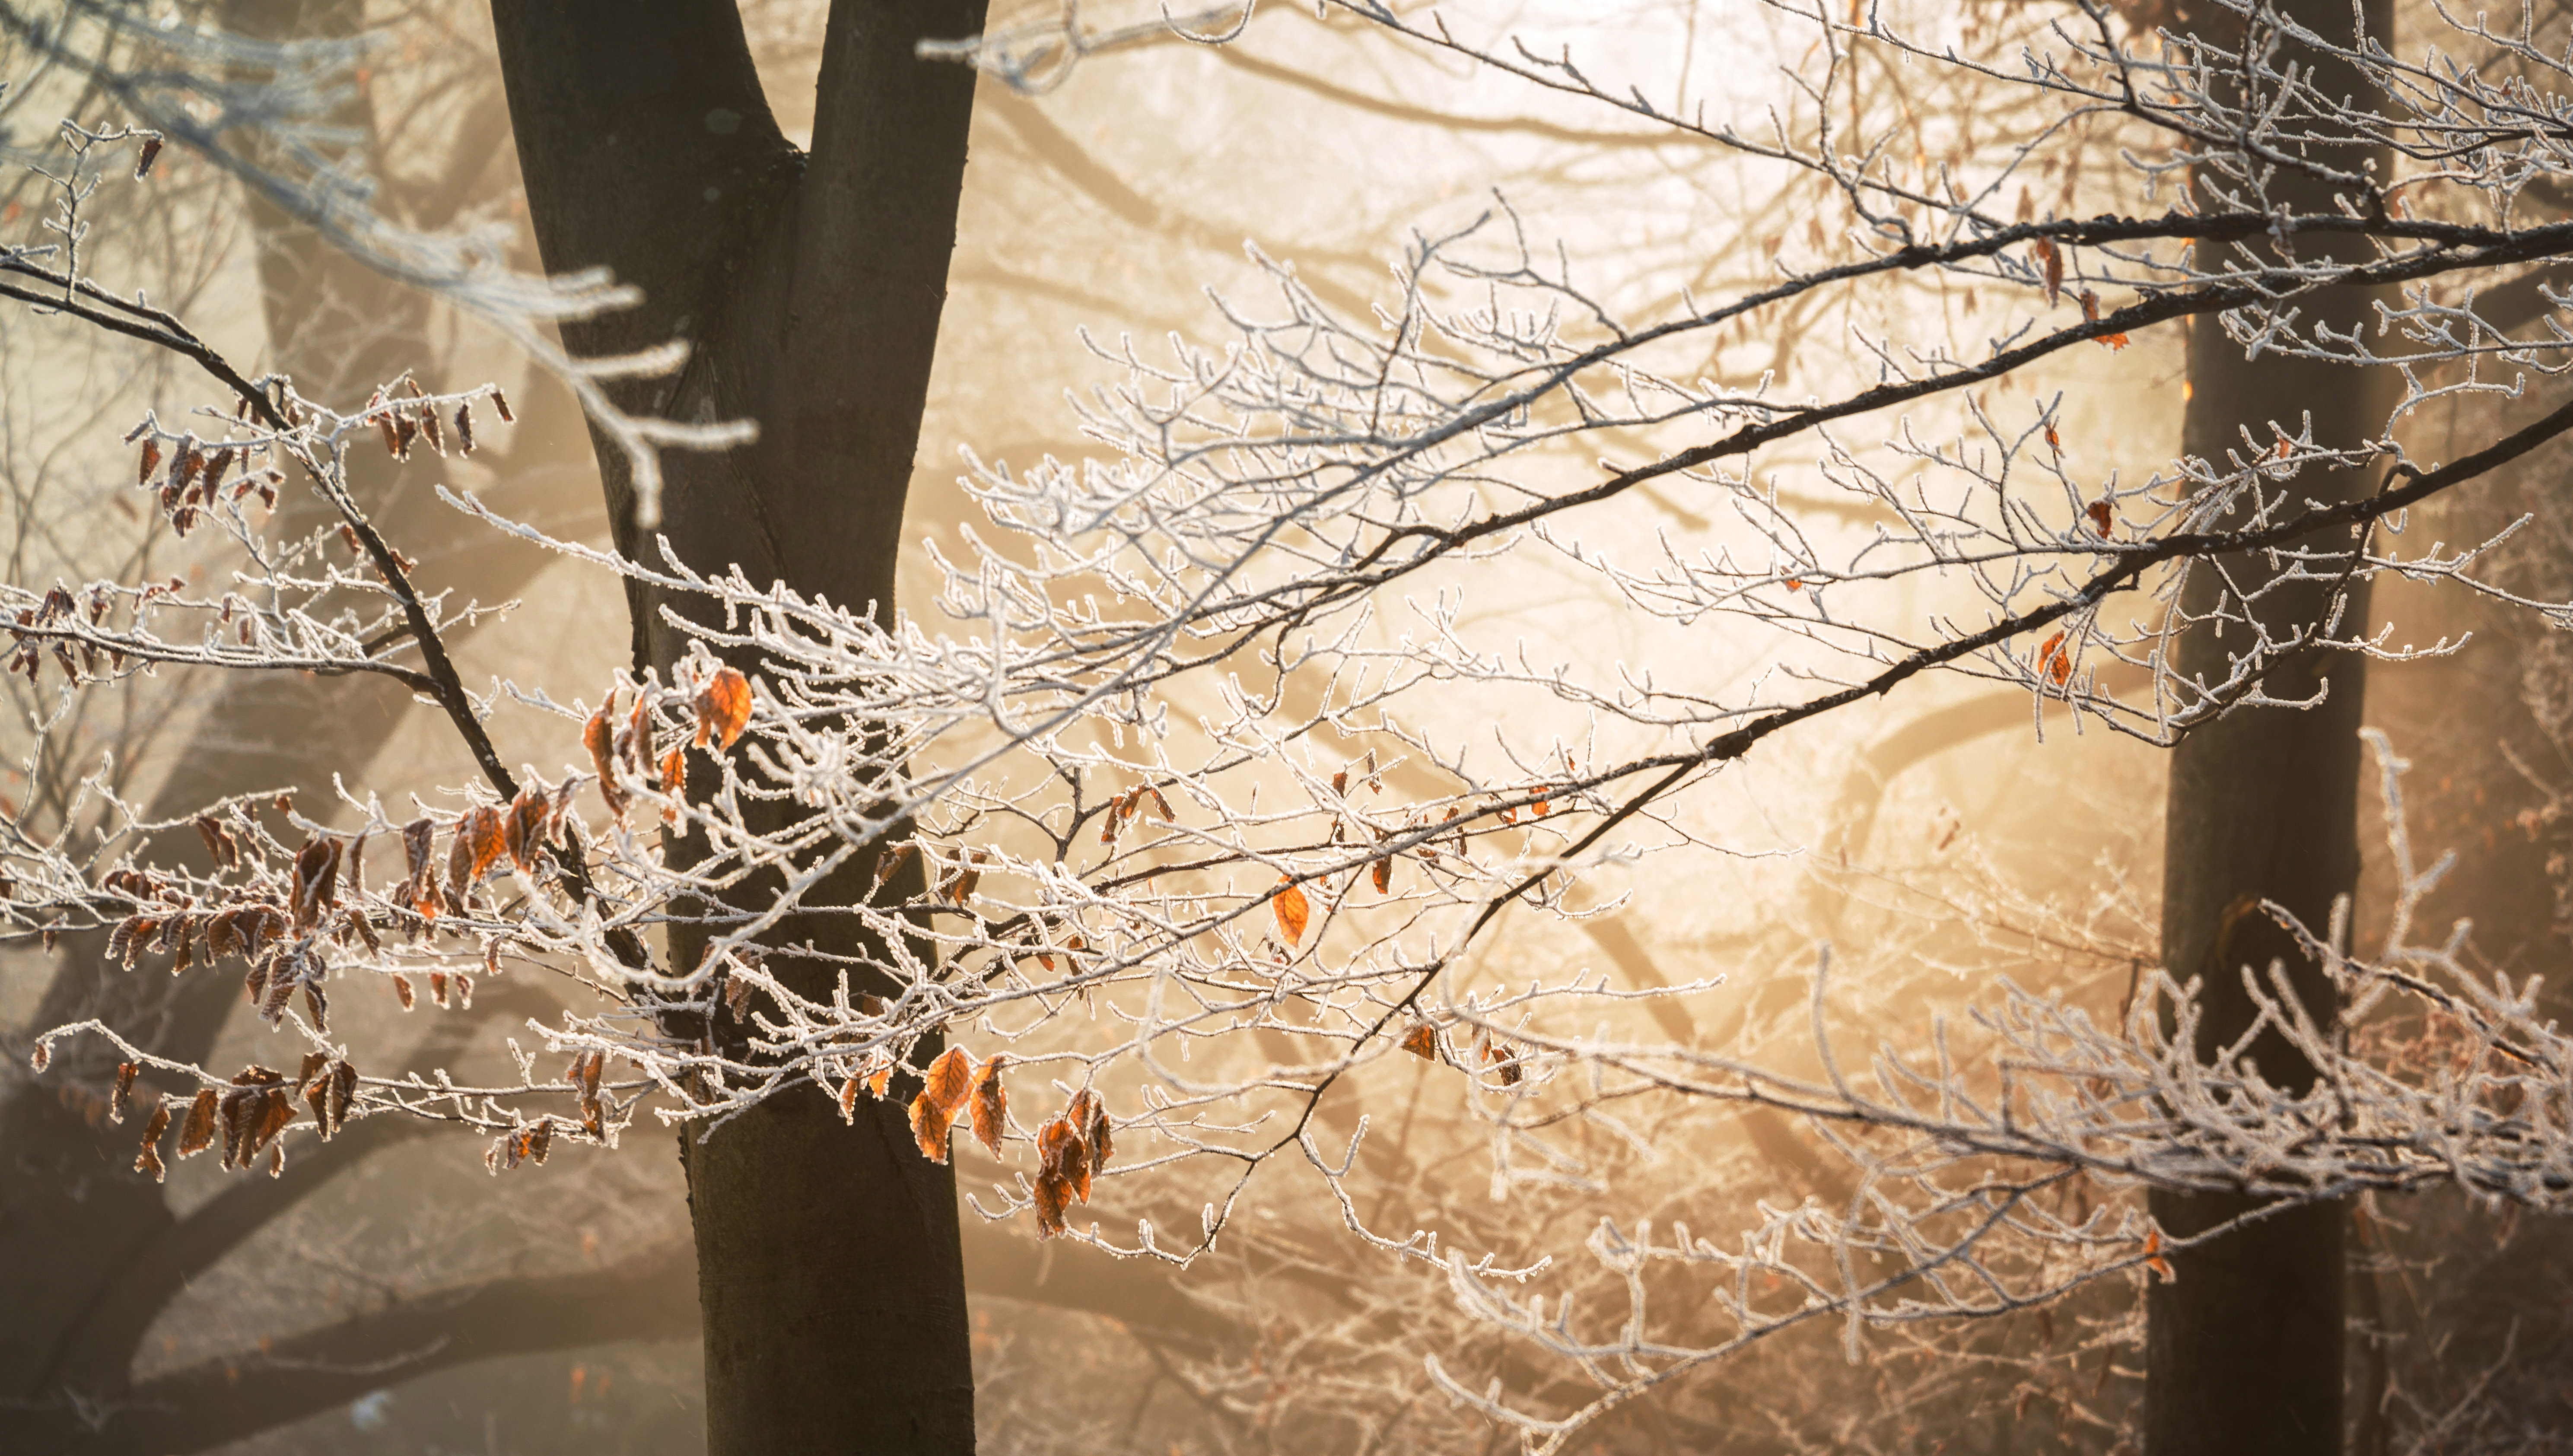 File:Frozen branches.jpg - Wikimedia Commons